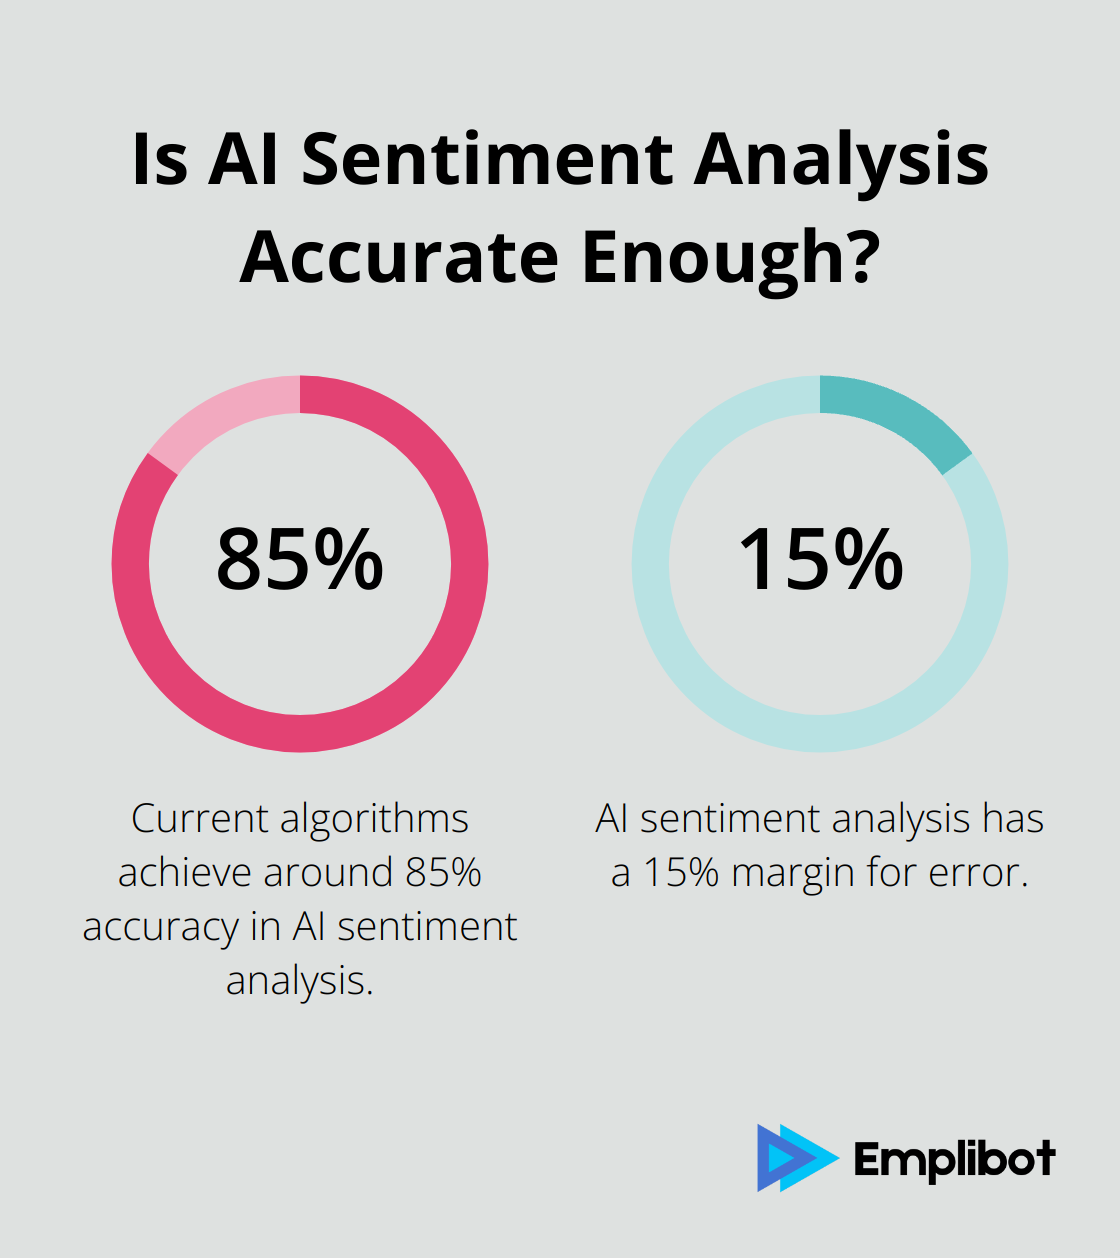 Fact - Is AI Sentiment Analysis Accurate Enough?